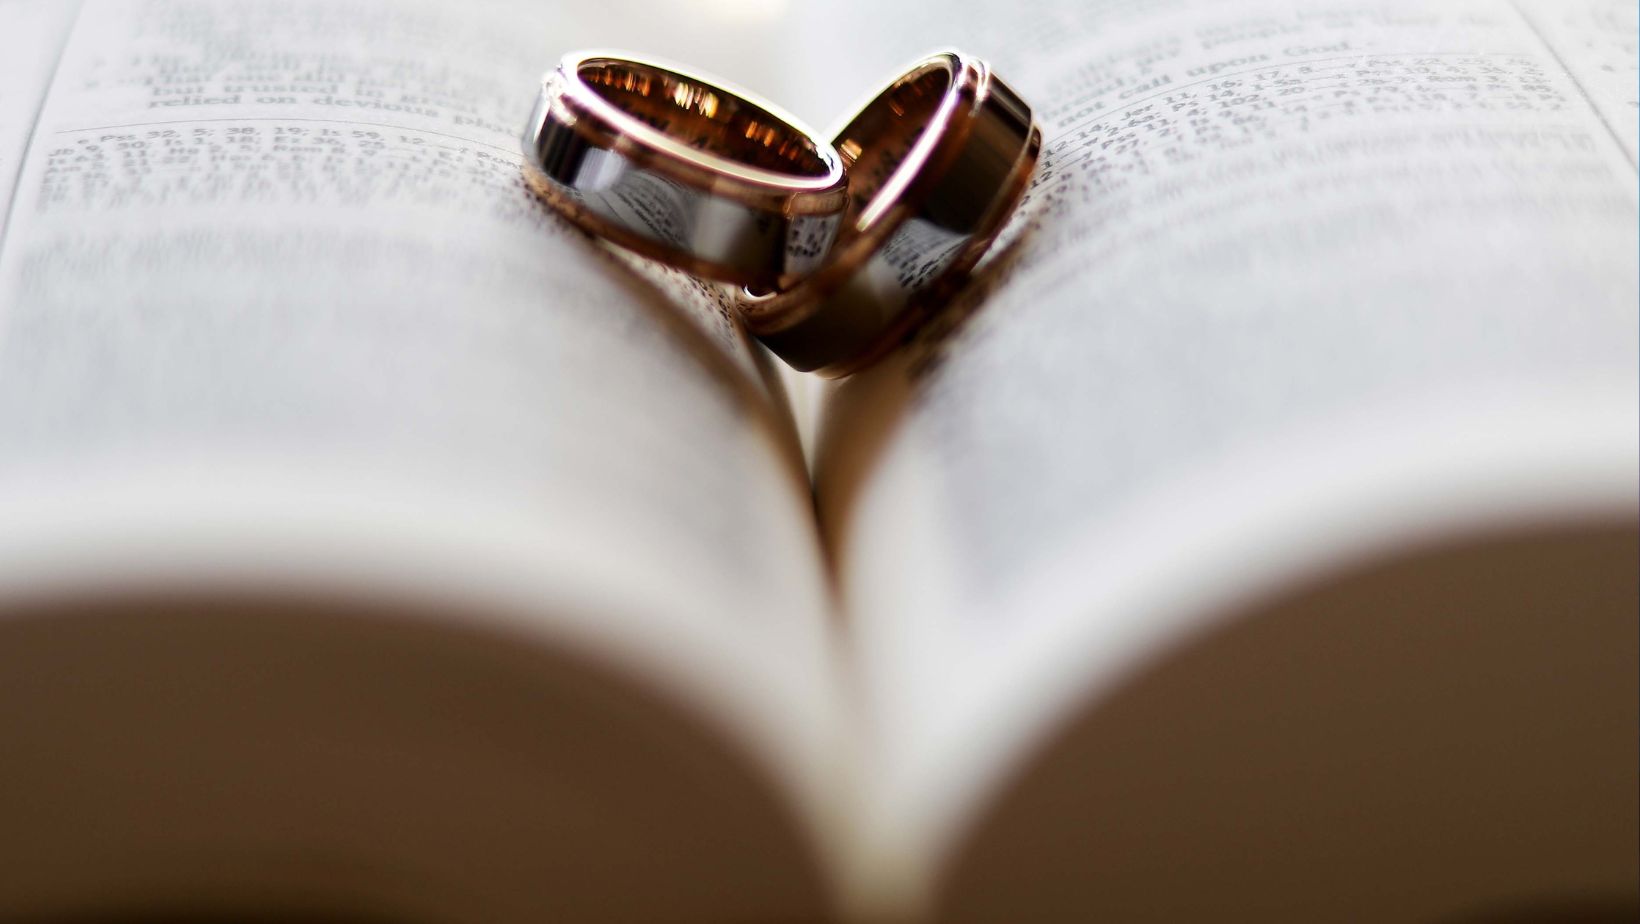 Can I Marry my Sister? A Look Into The Legal And Moral Implications